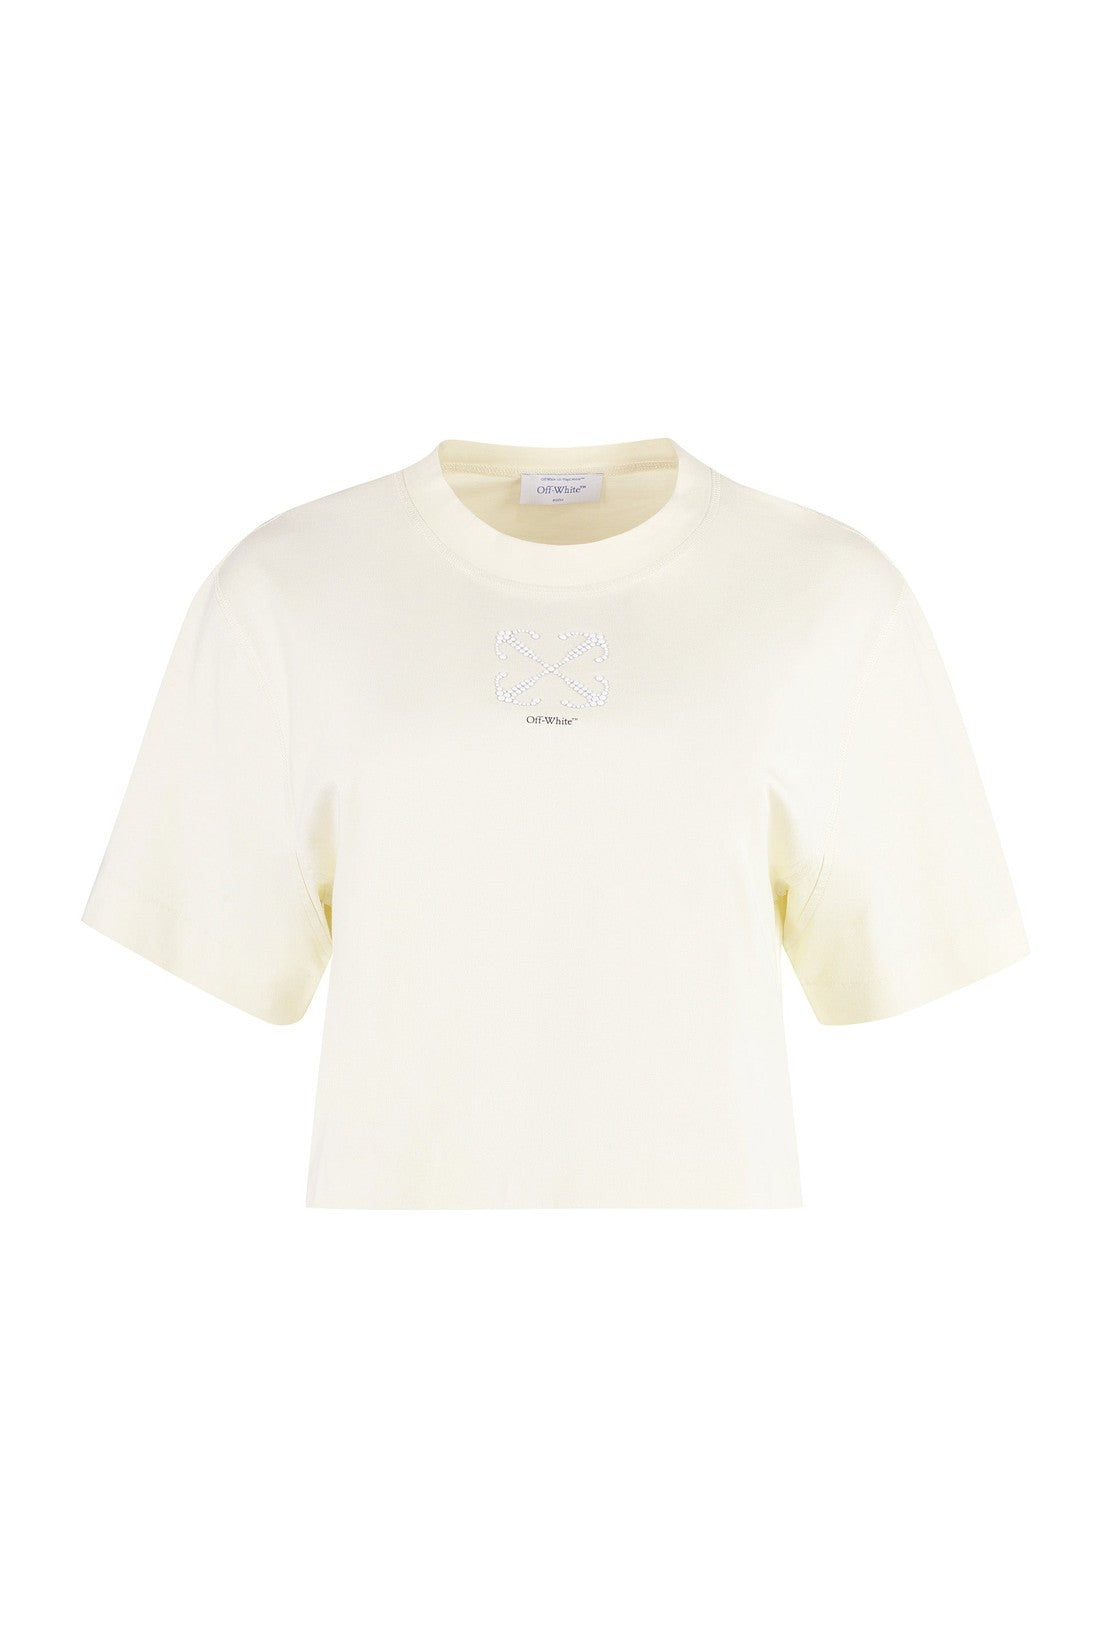 Off-White-OUTLET-SALE-Logo detail cropped t-shirt-ARCHIVIST